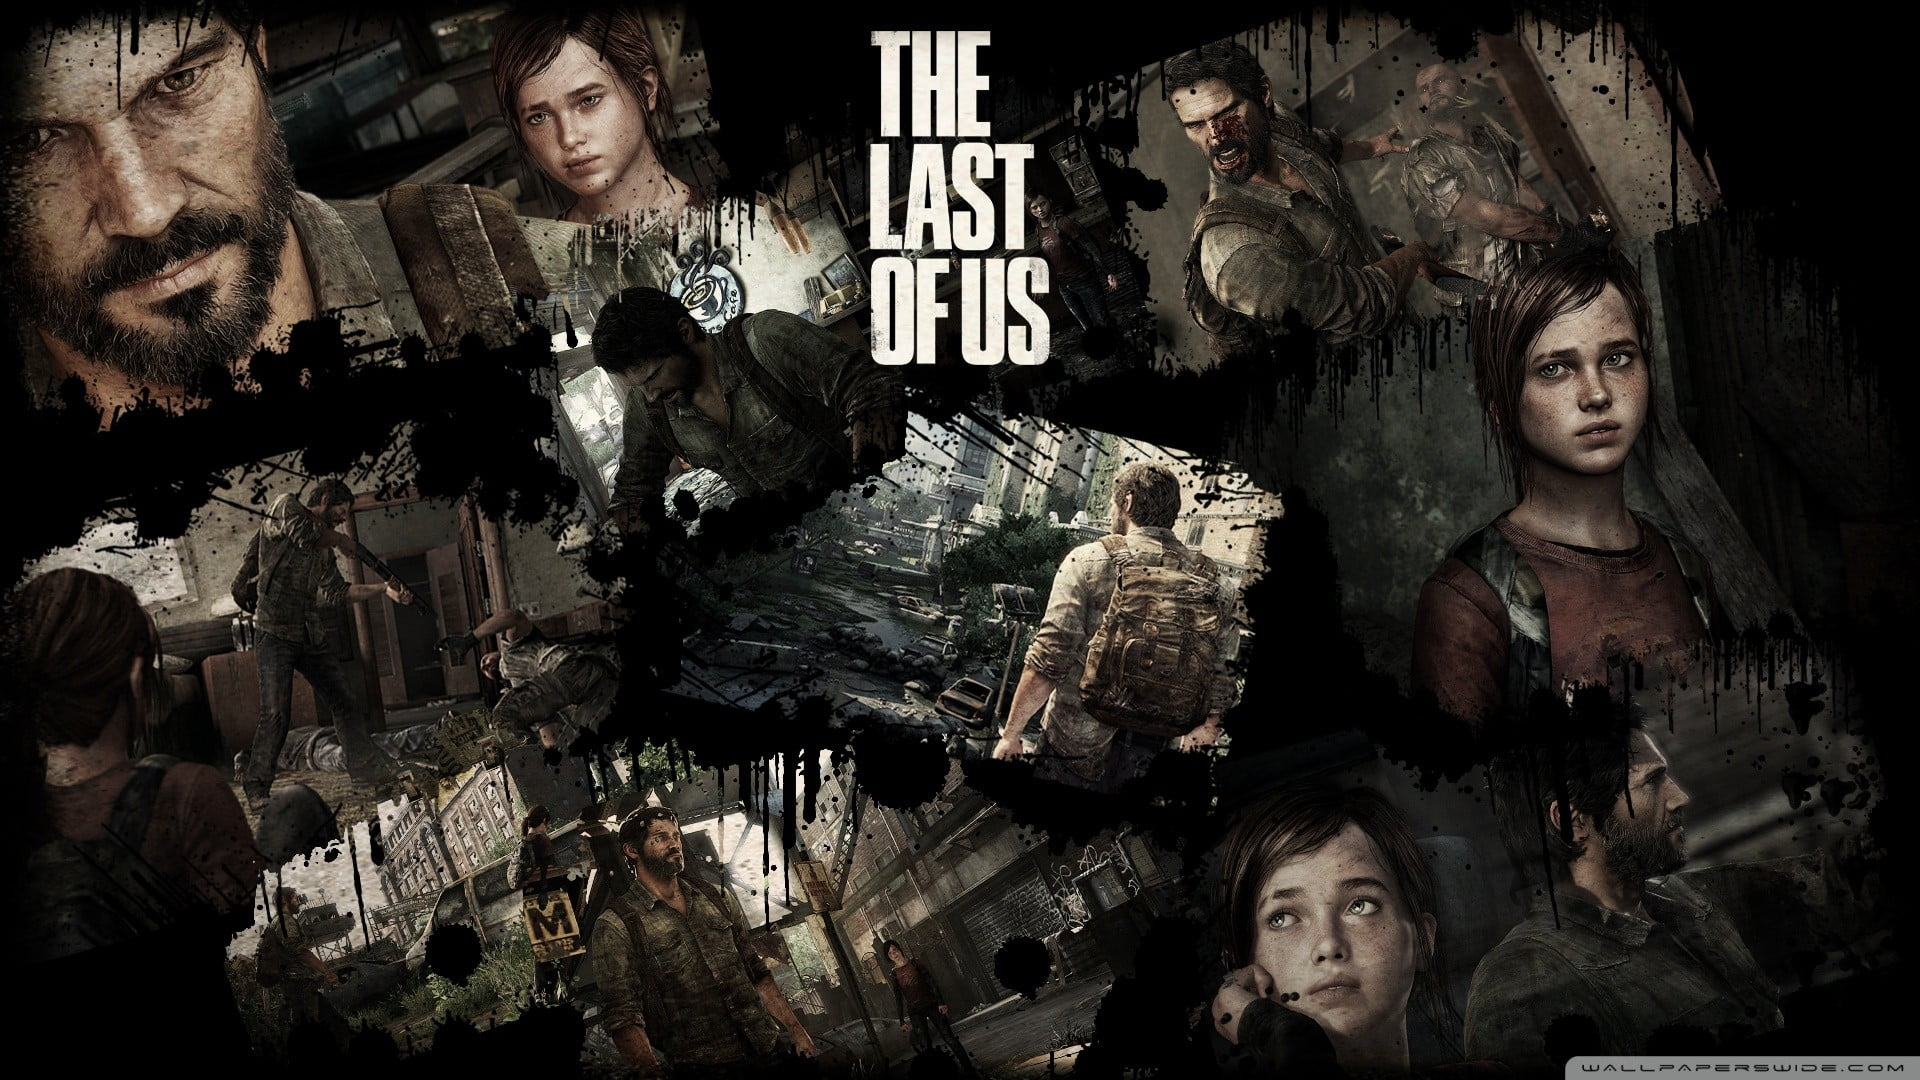 The Last of Us movie poster HD wallpaper